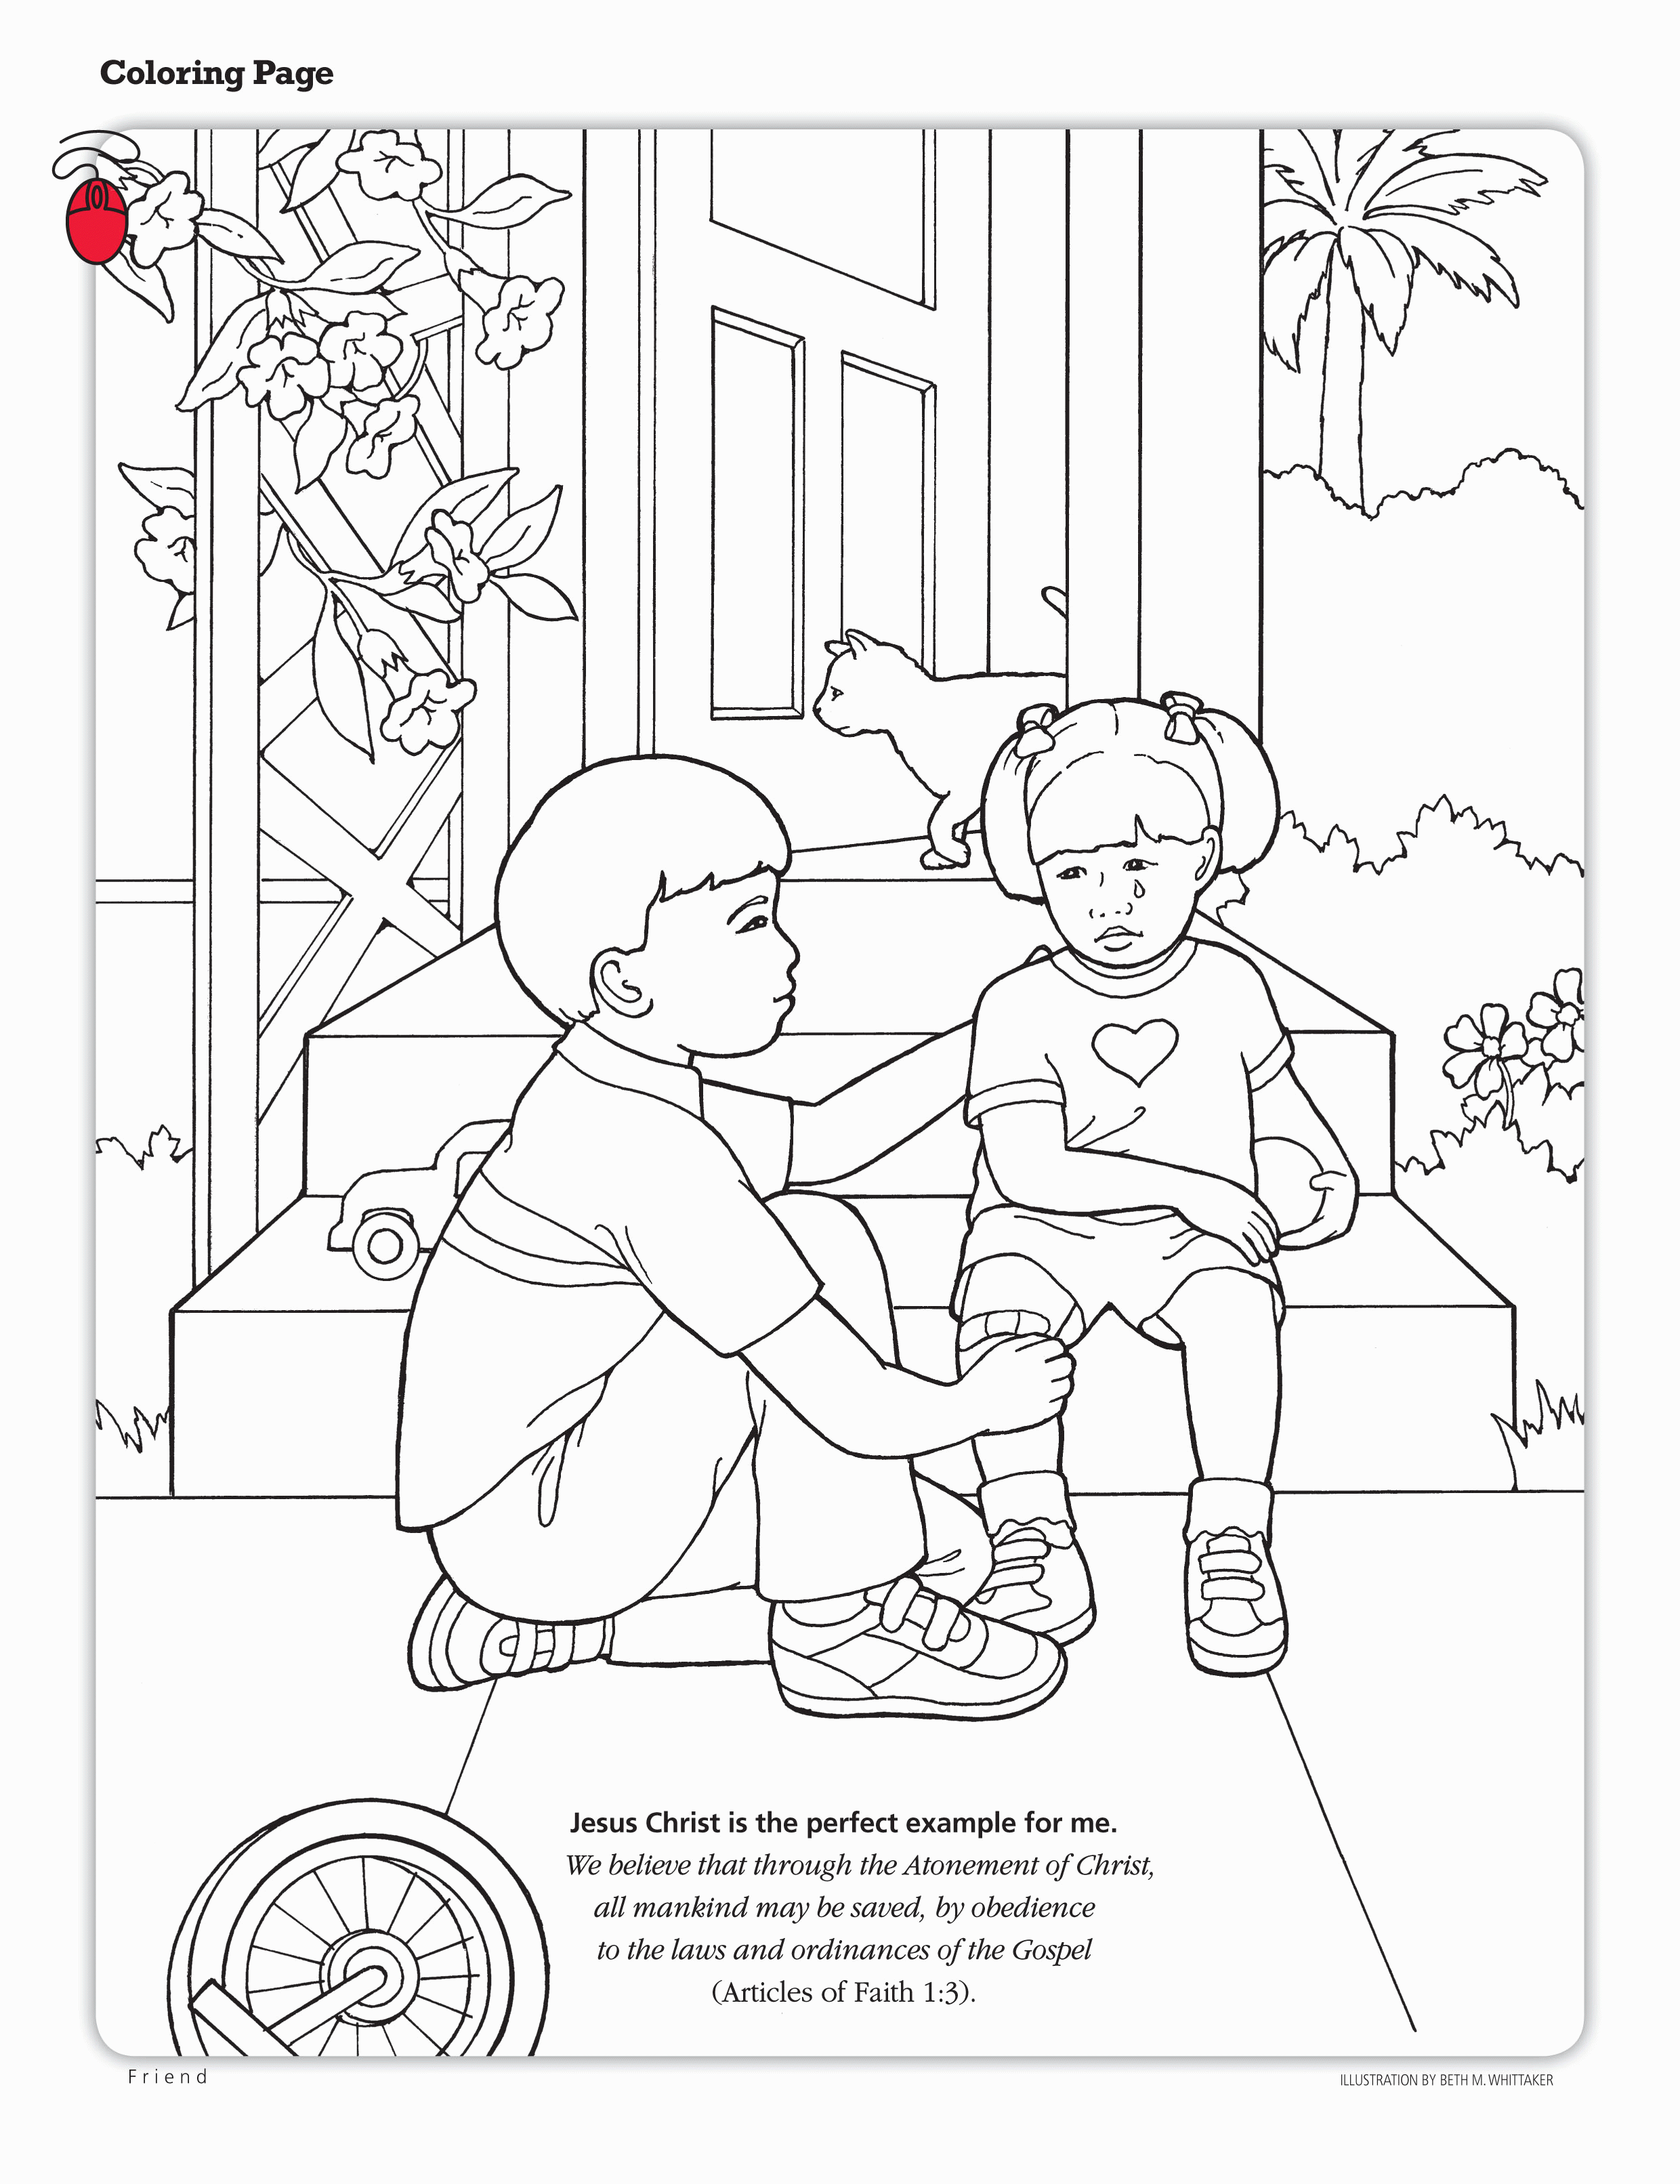 Helping Others Coloring Page - Coloring Home